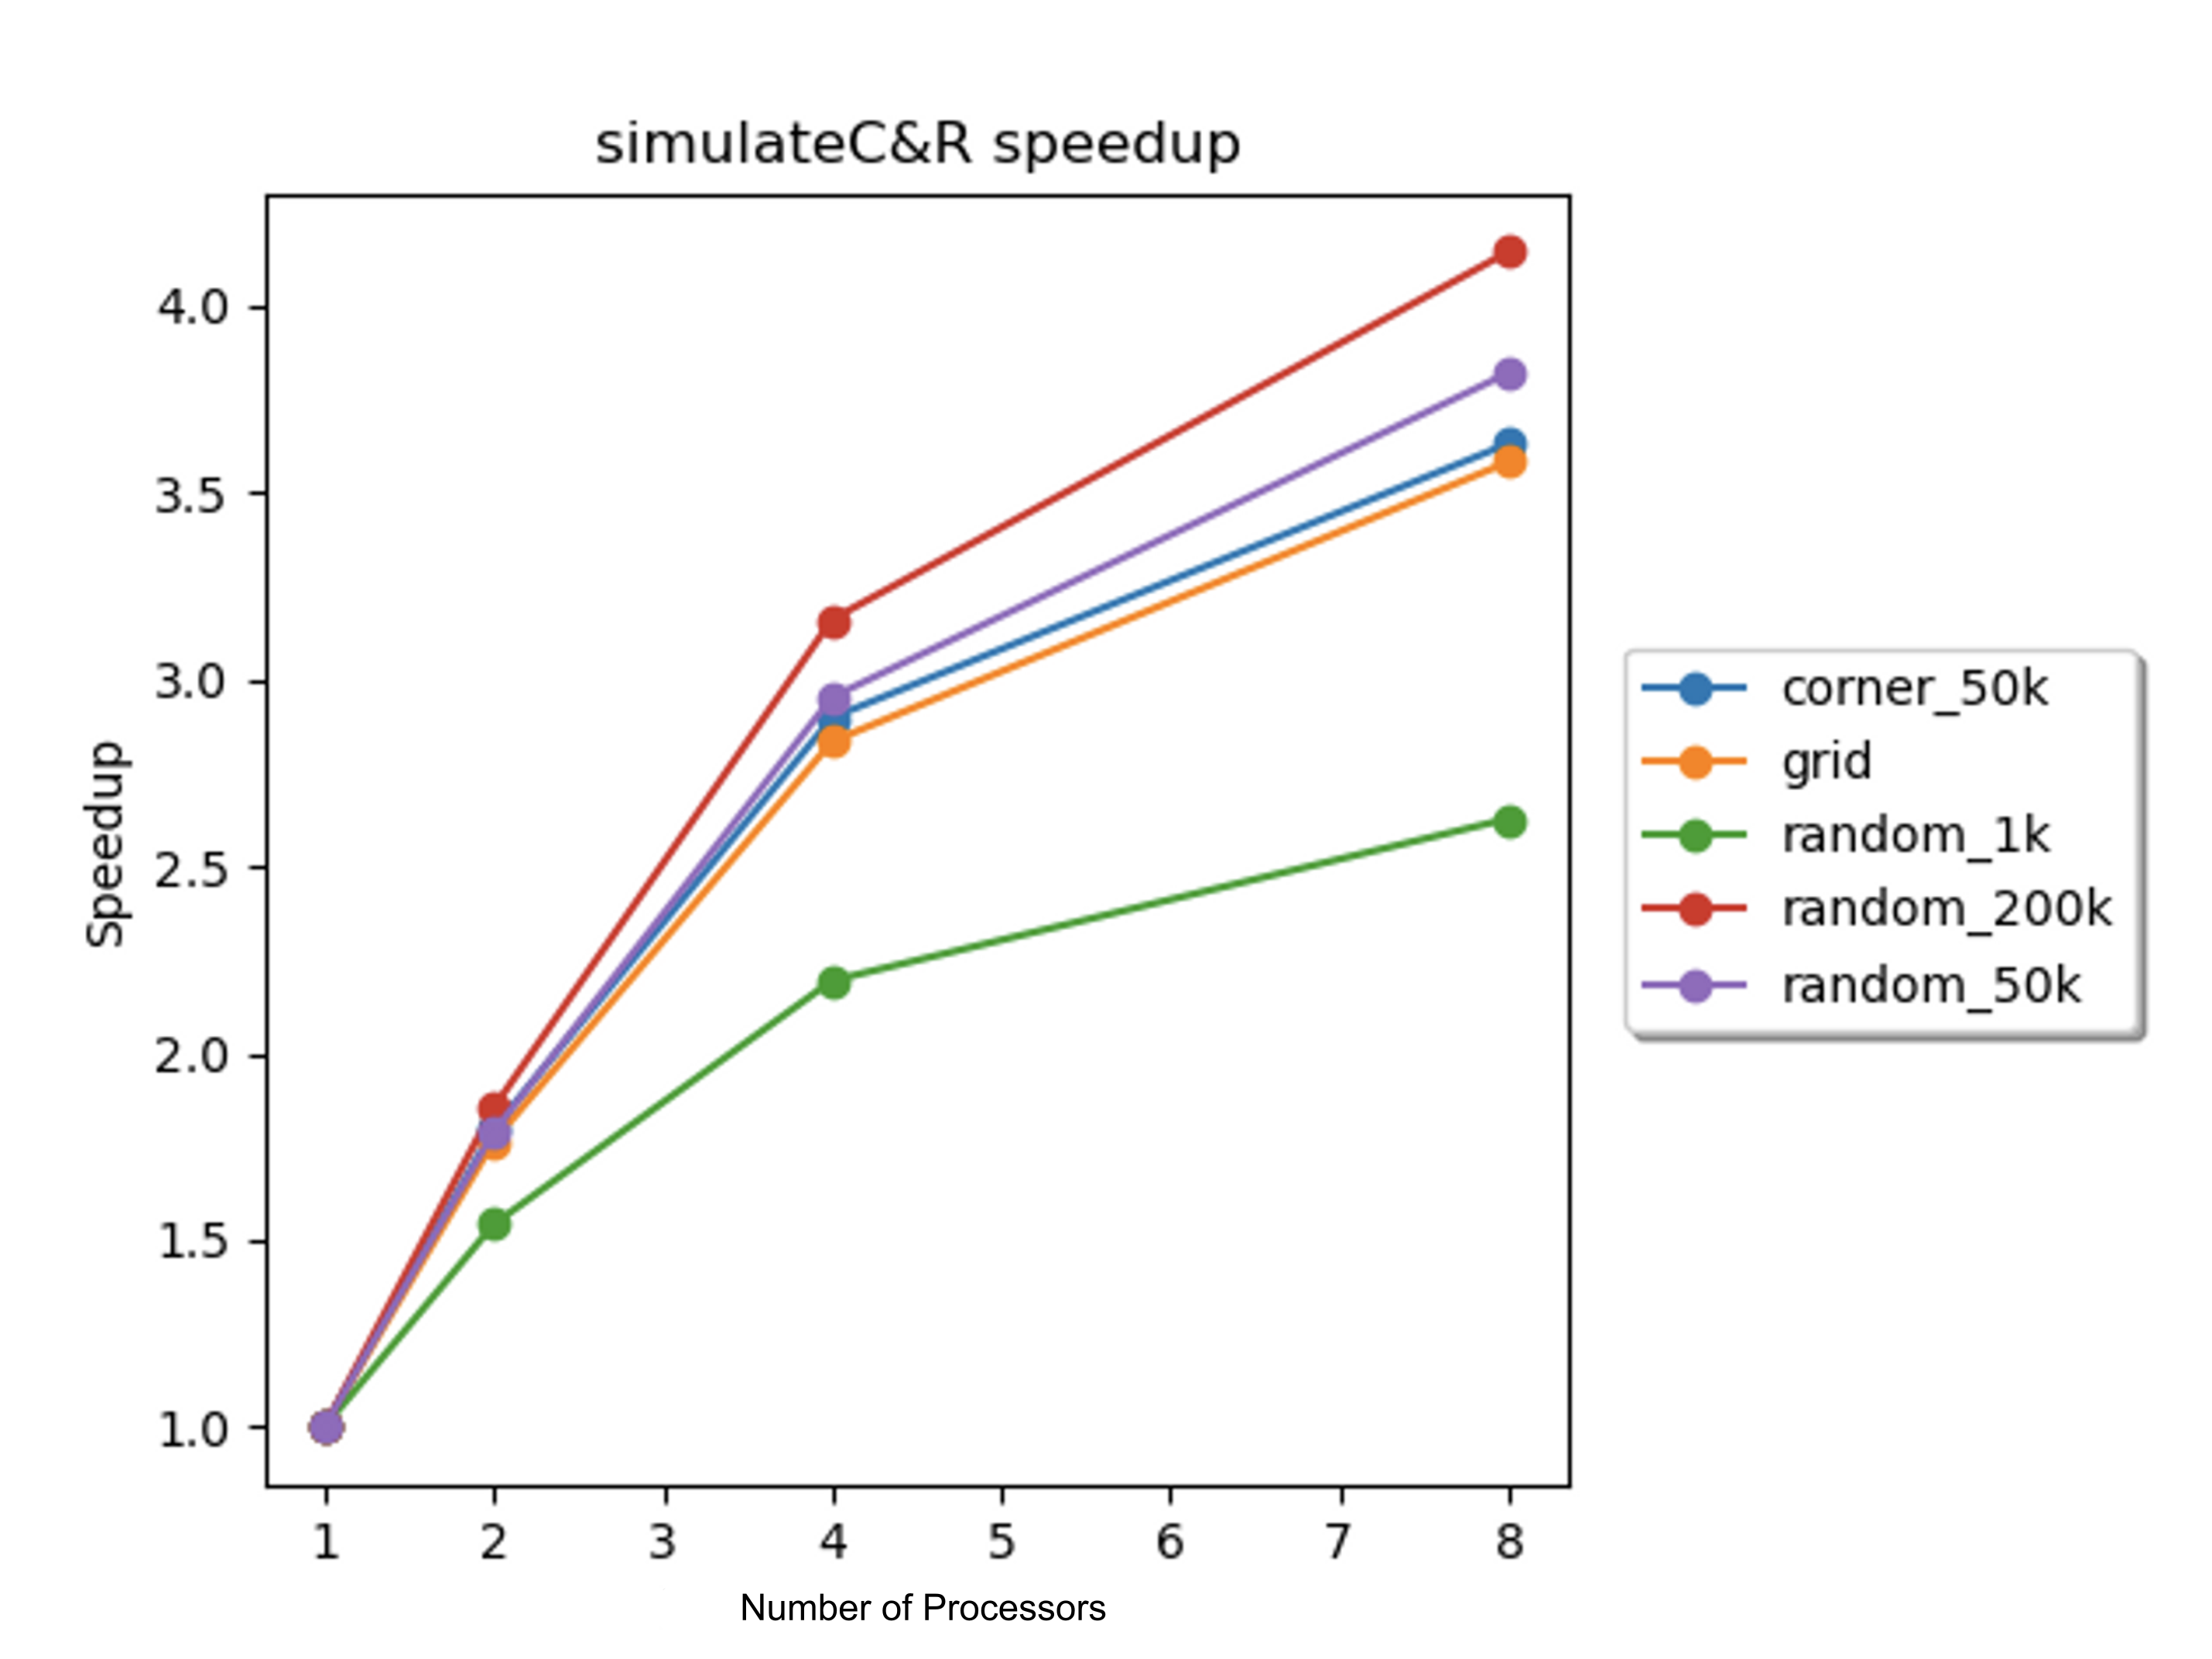 Figure 10. Speedup vs. number of processors for collision and reaction simulation on 8-core GHC machines for each scene.